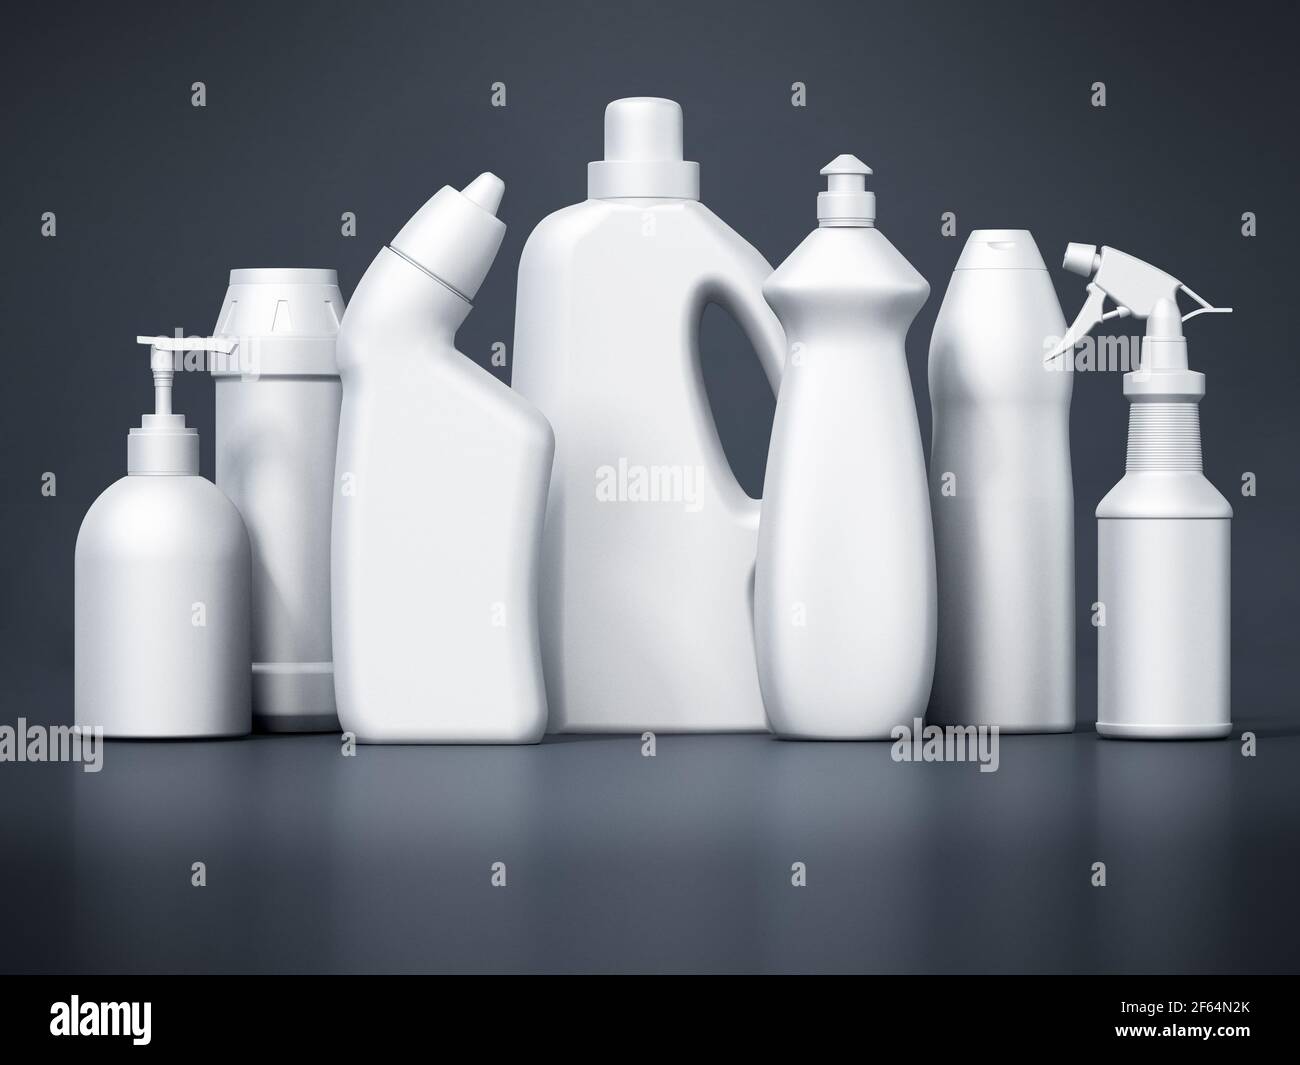 Blank cleaning product packages isolated on black background. 3D illustration. Stock Photo